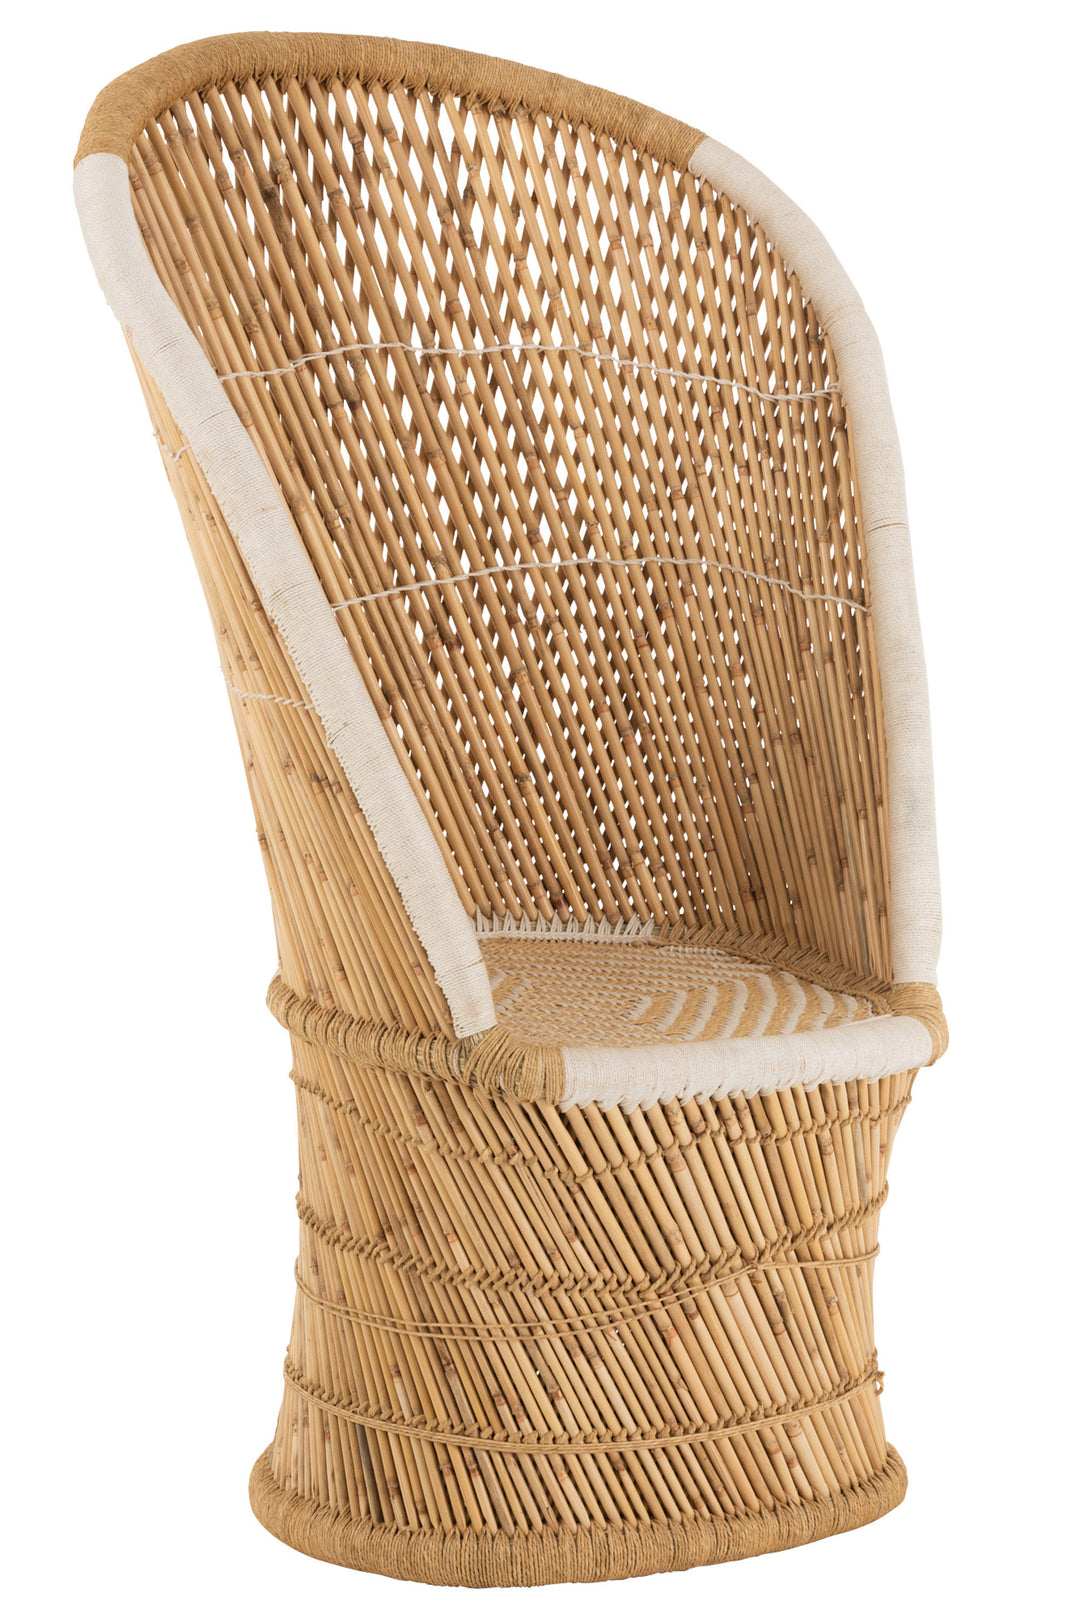 J-Line by Jolipa CHAIR BACK BAMBOO NAT/WH ADULT